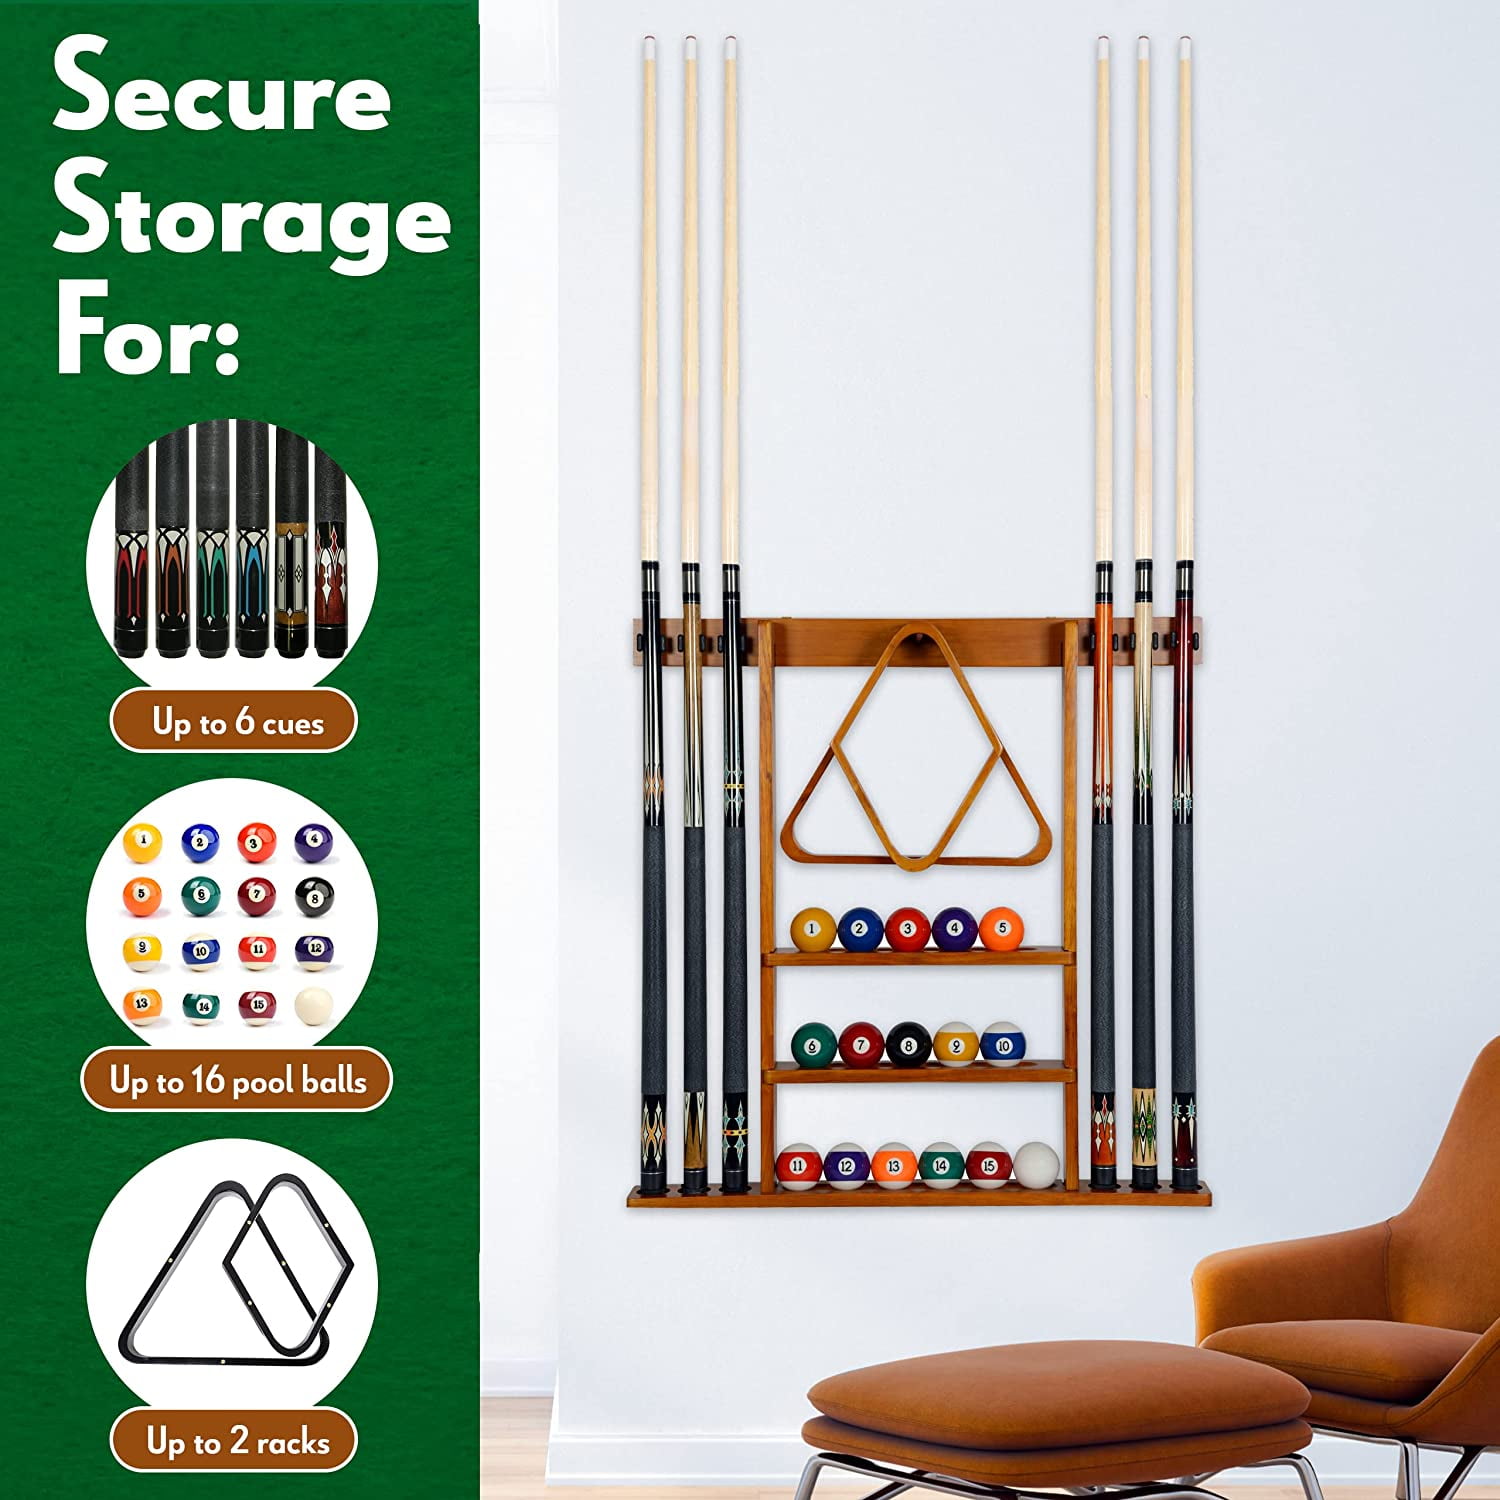 6 Pool Billiard Stick Cue Rack Only Ball Set Wall Rack Holder Mandycng Elegant Wooden Wall Mounted Cue Rack Great for Home Sports Club Fitness Pub Restaurant Mahogany Color 